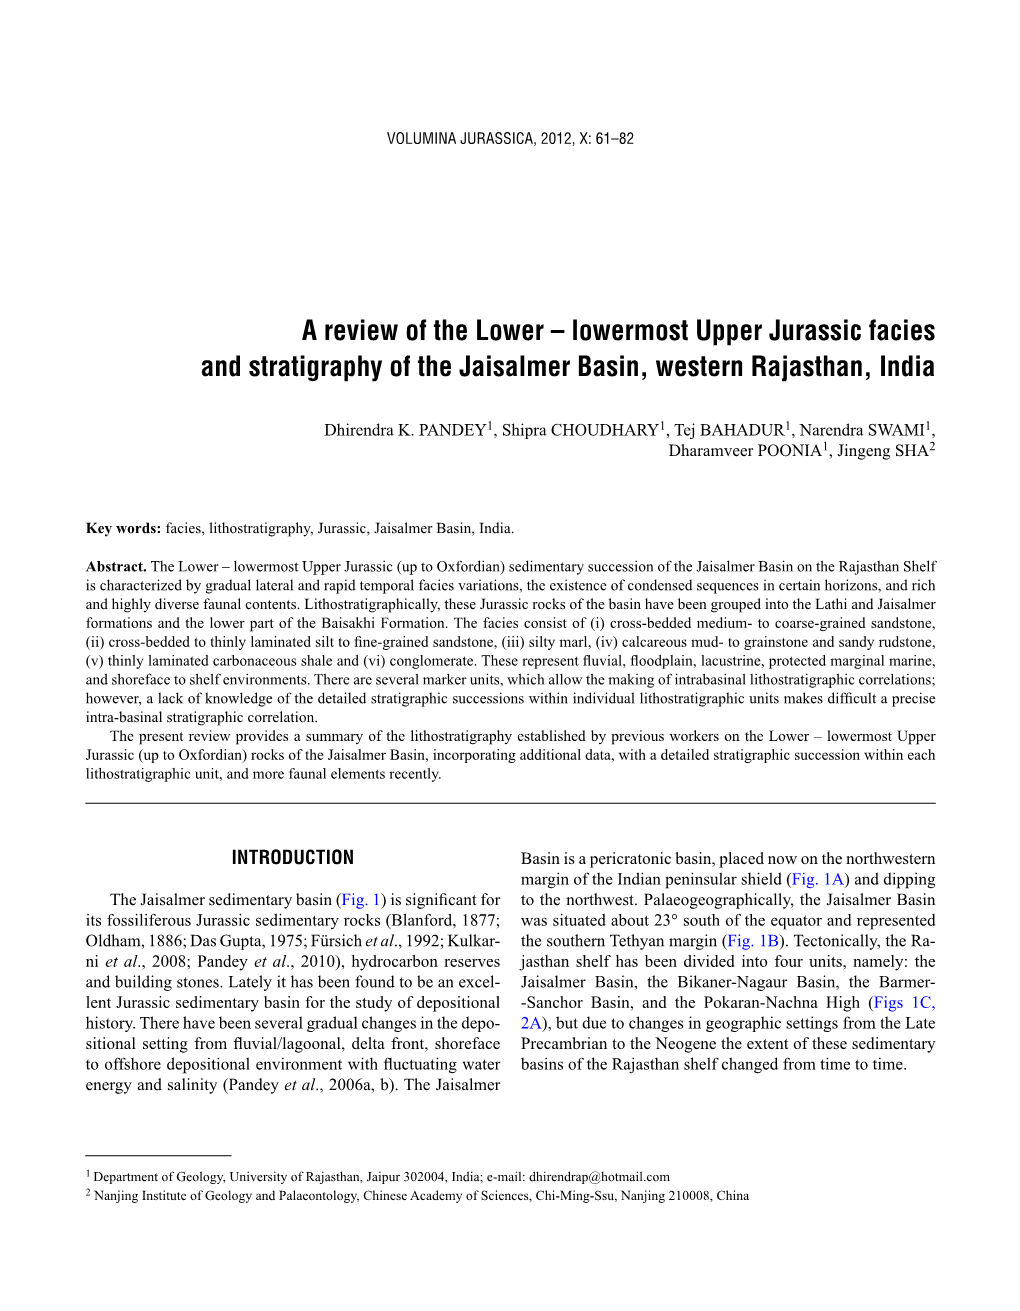 Lowermost Upper Jurassic Facies and Stratigraphy of the Jaisalmer Basin, Western Rajasthan, India